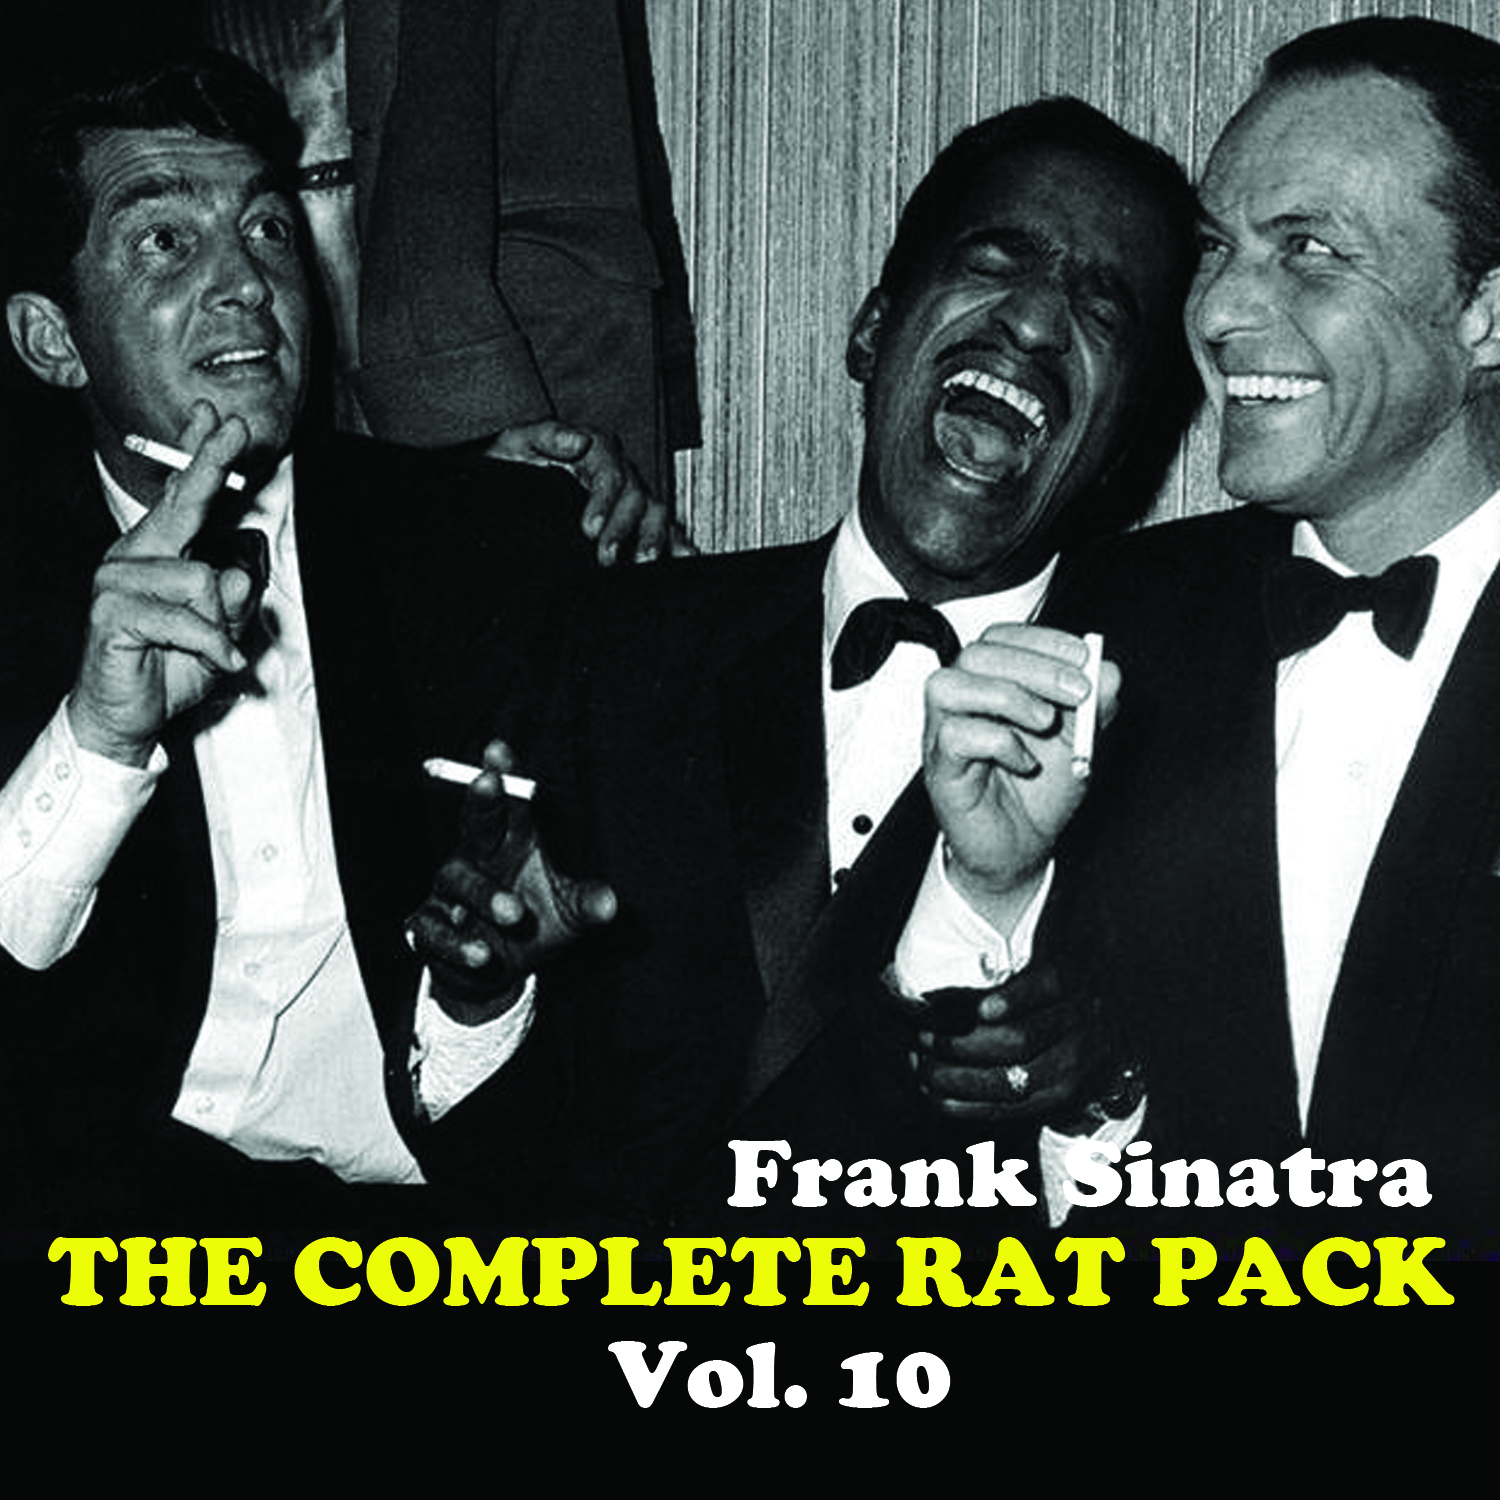 The Complete Rat Pack, Vol. 10